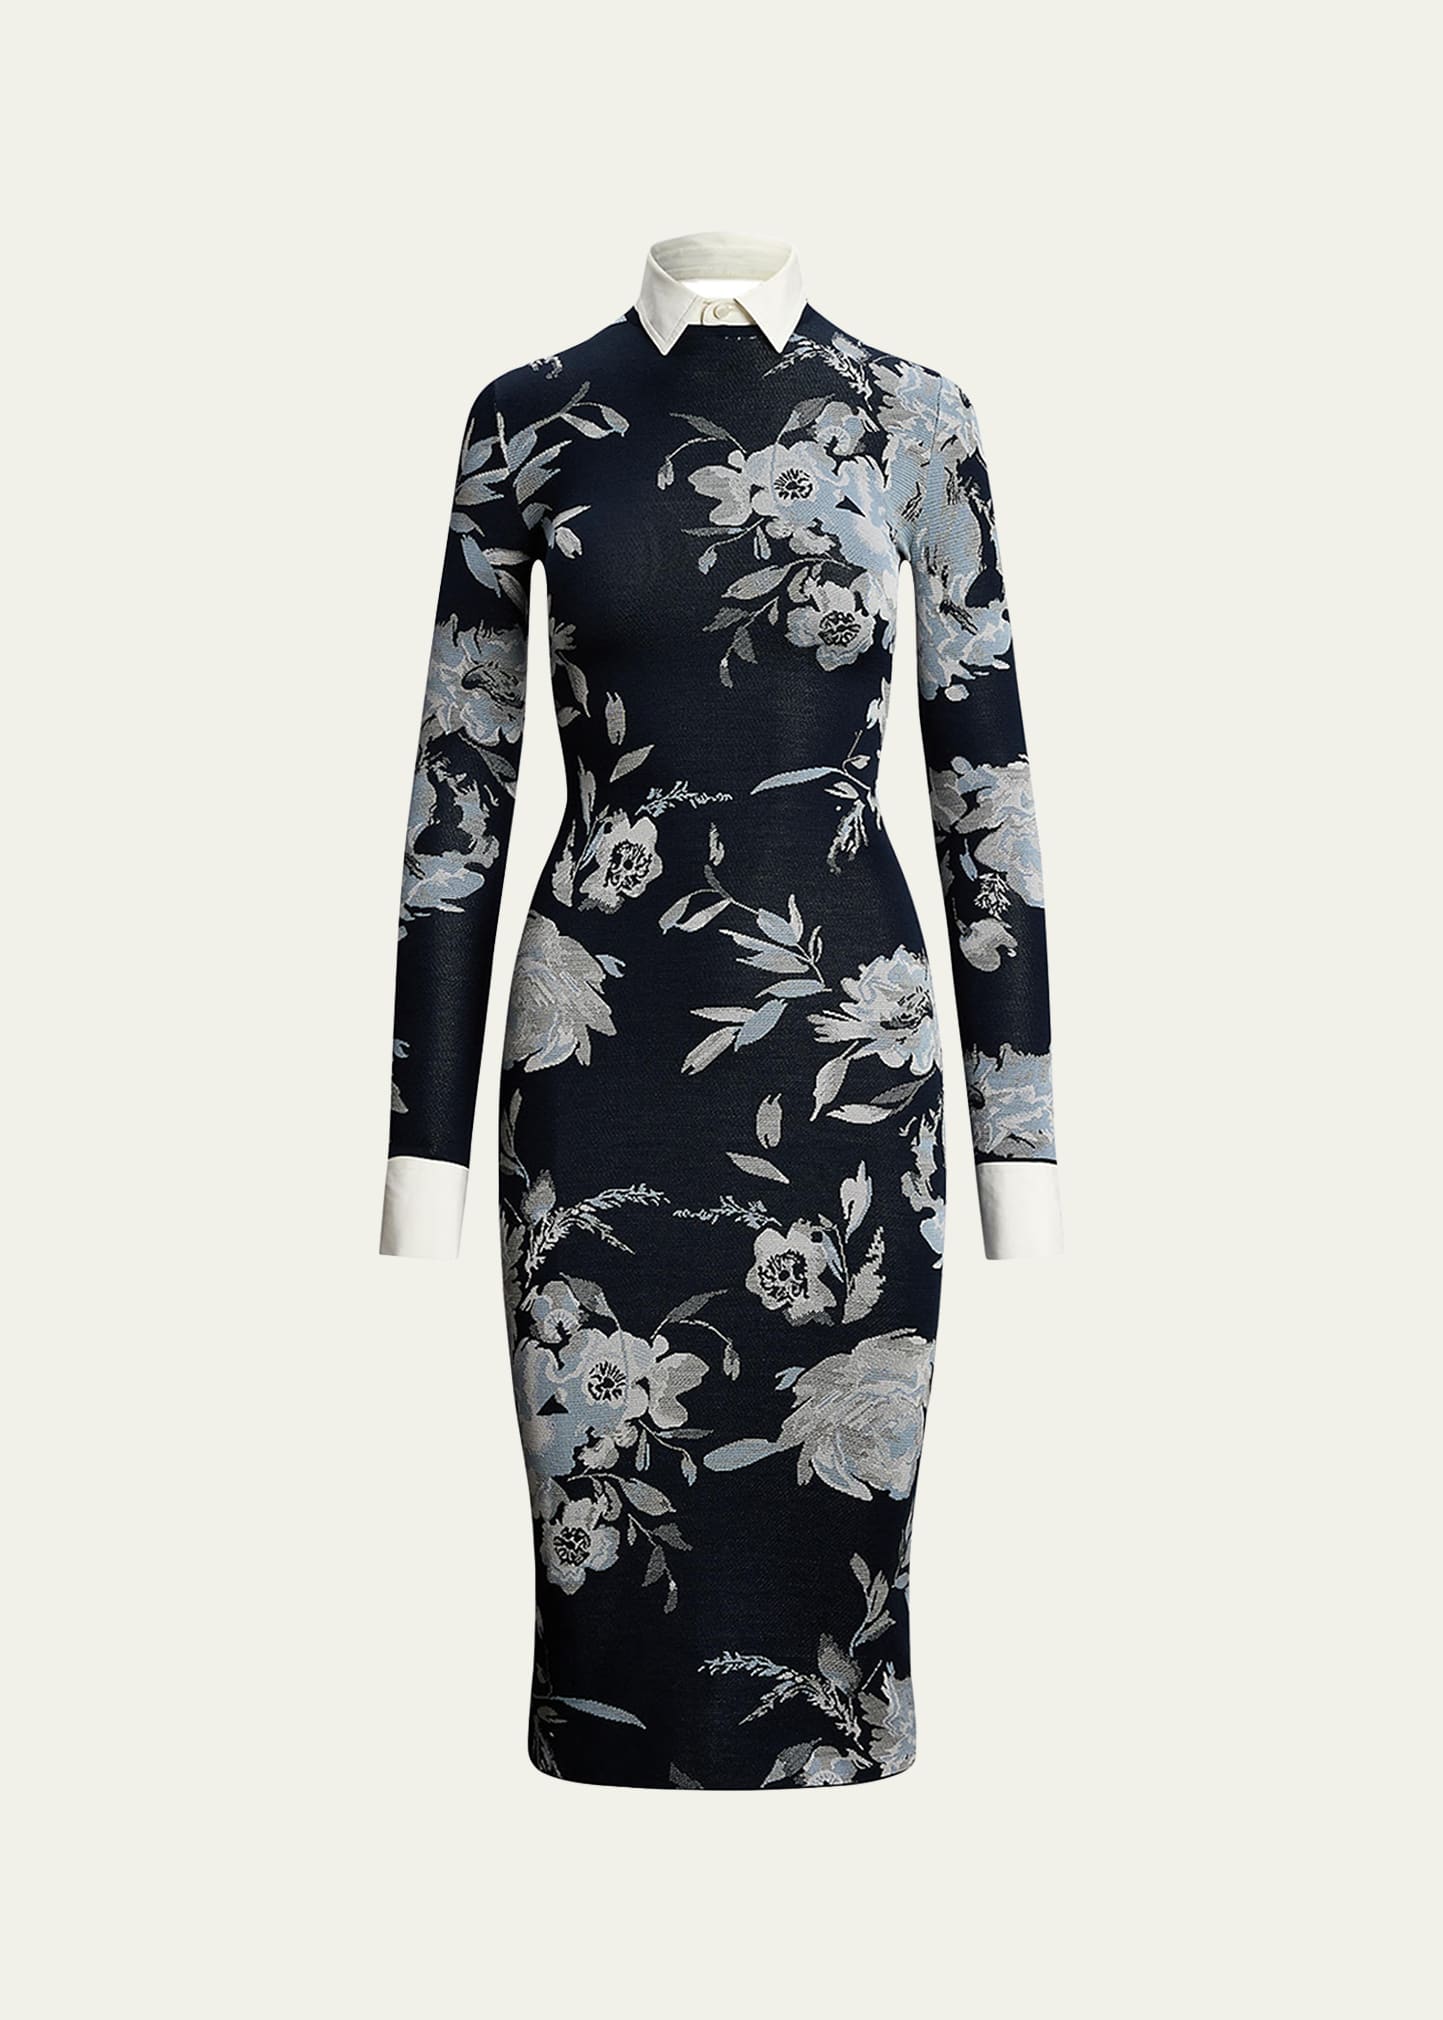 Ralph Lauren Floral Jacquard Sweater Day Dress In Navy Multi